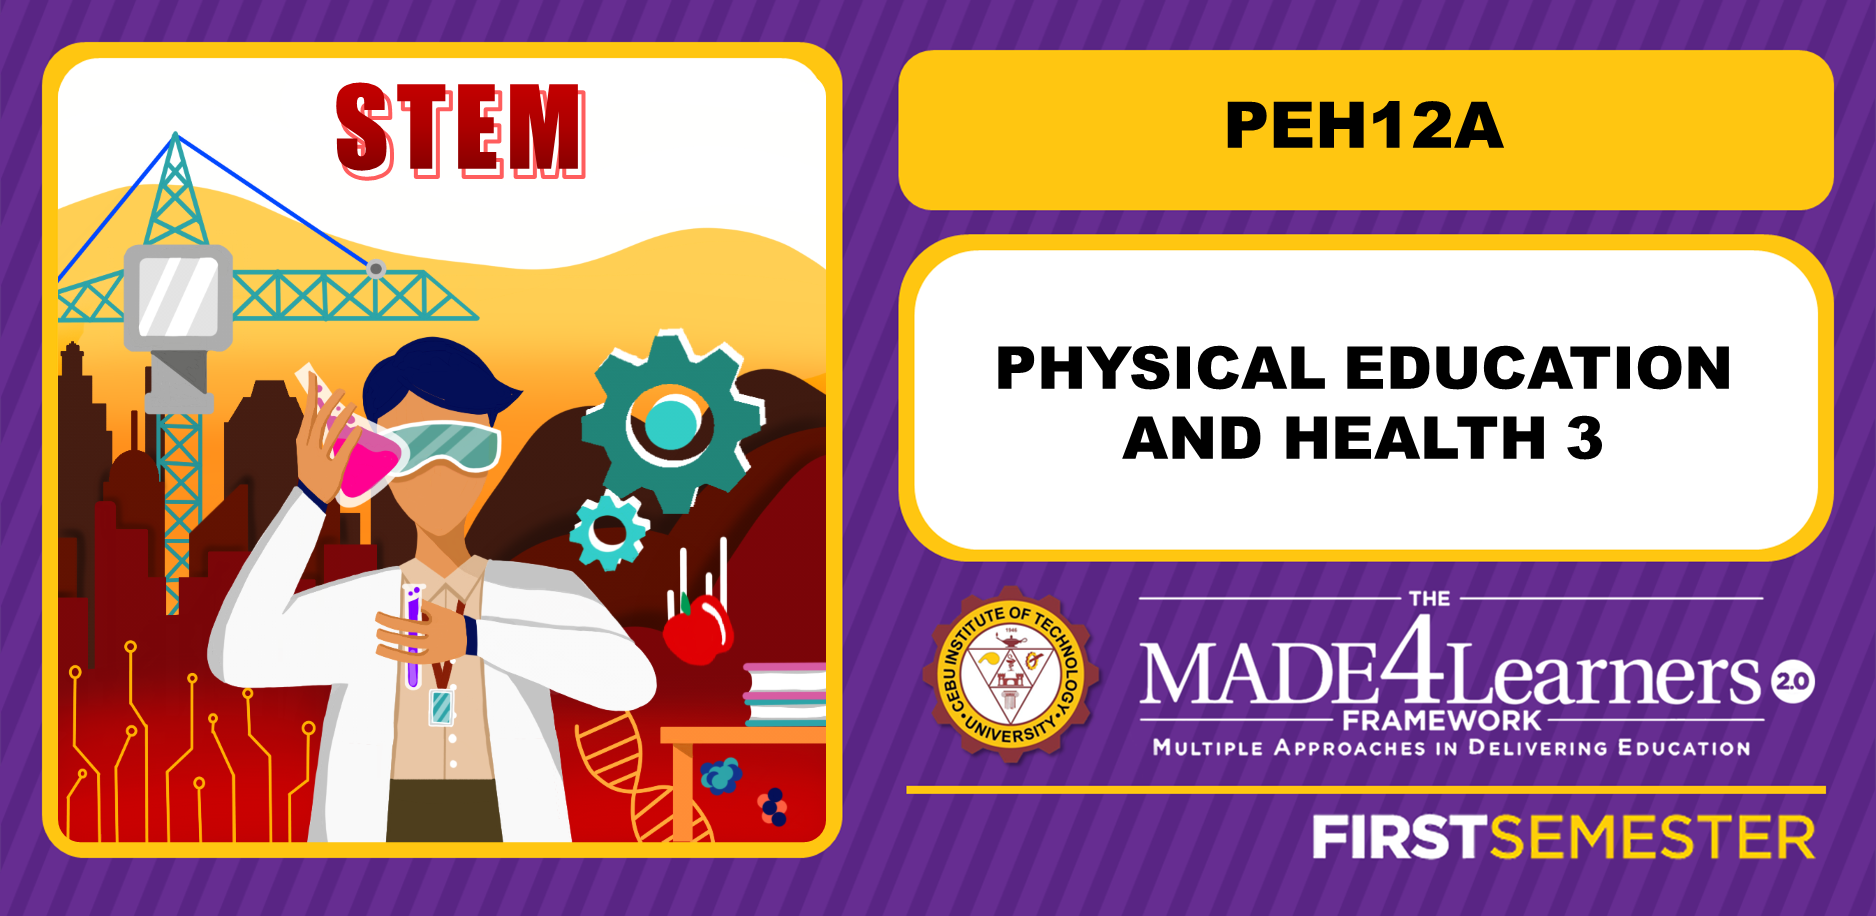 PEH12A: Physical Education and Health 3 (STEM)